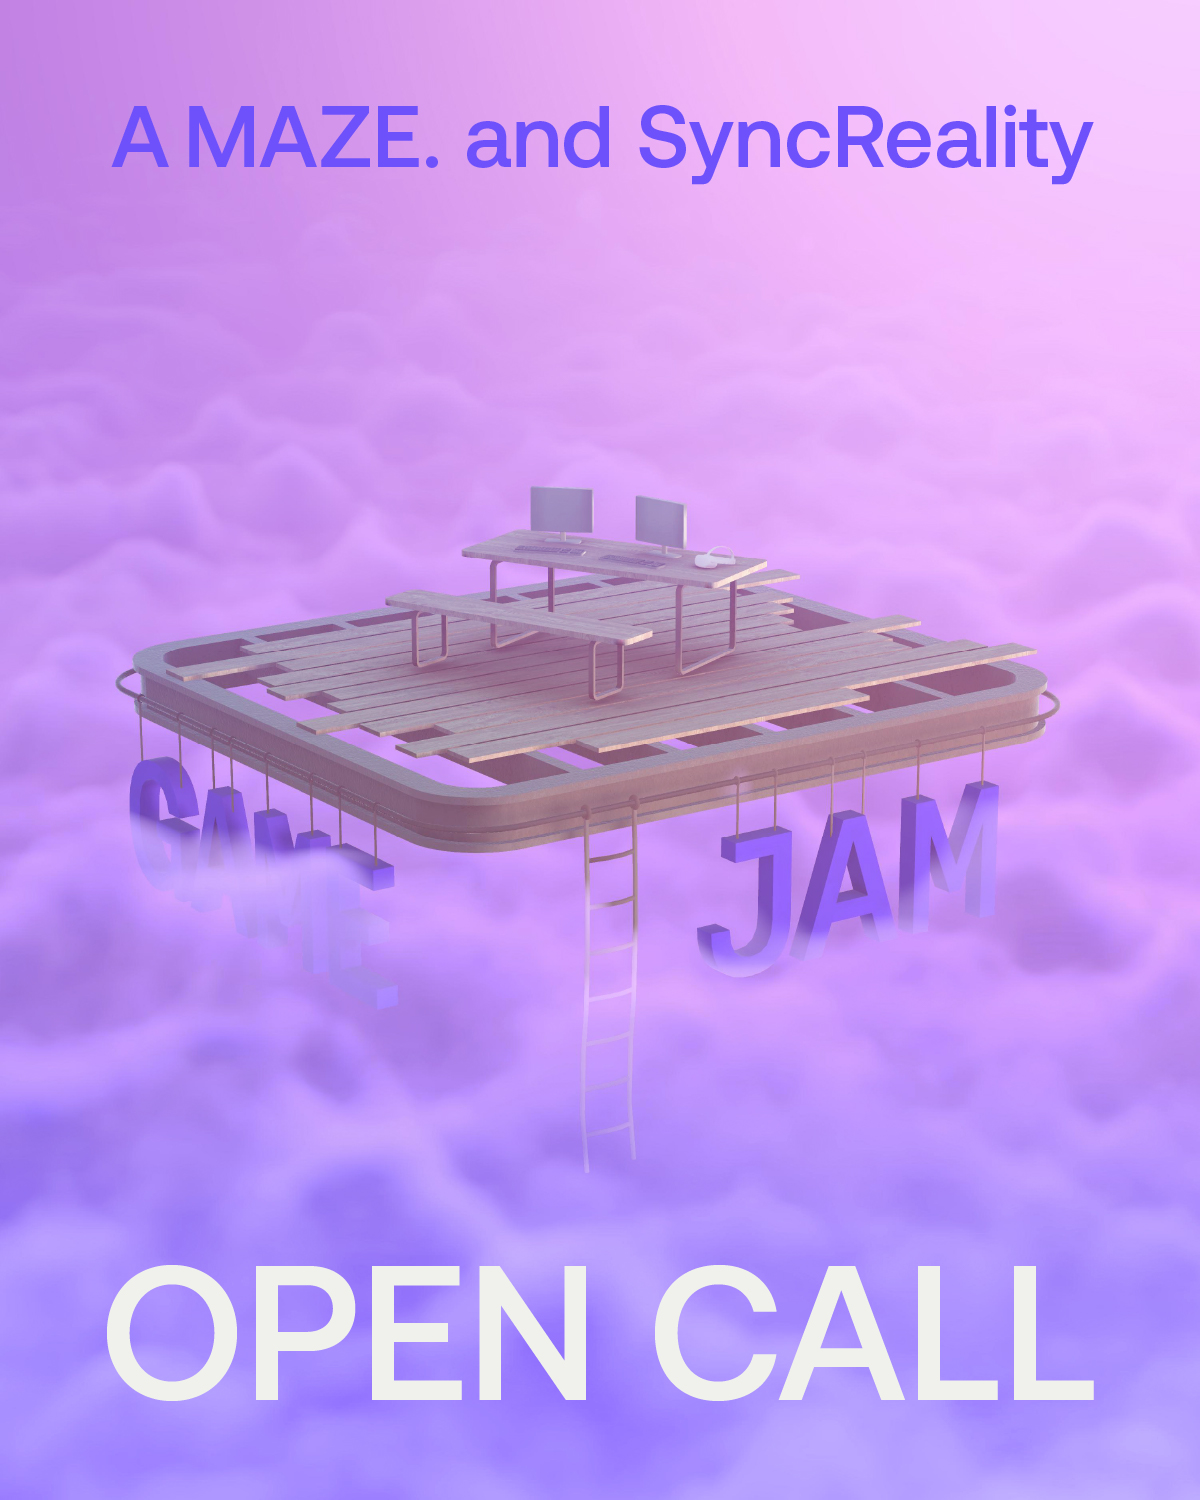 Calling for A MAZE. and SyncReality XR GAME Jam